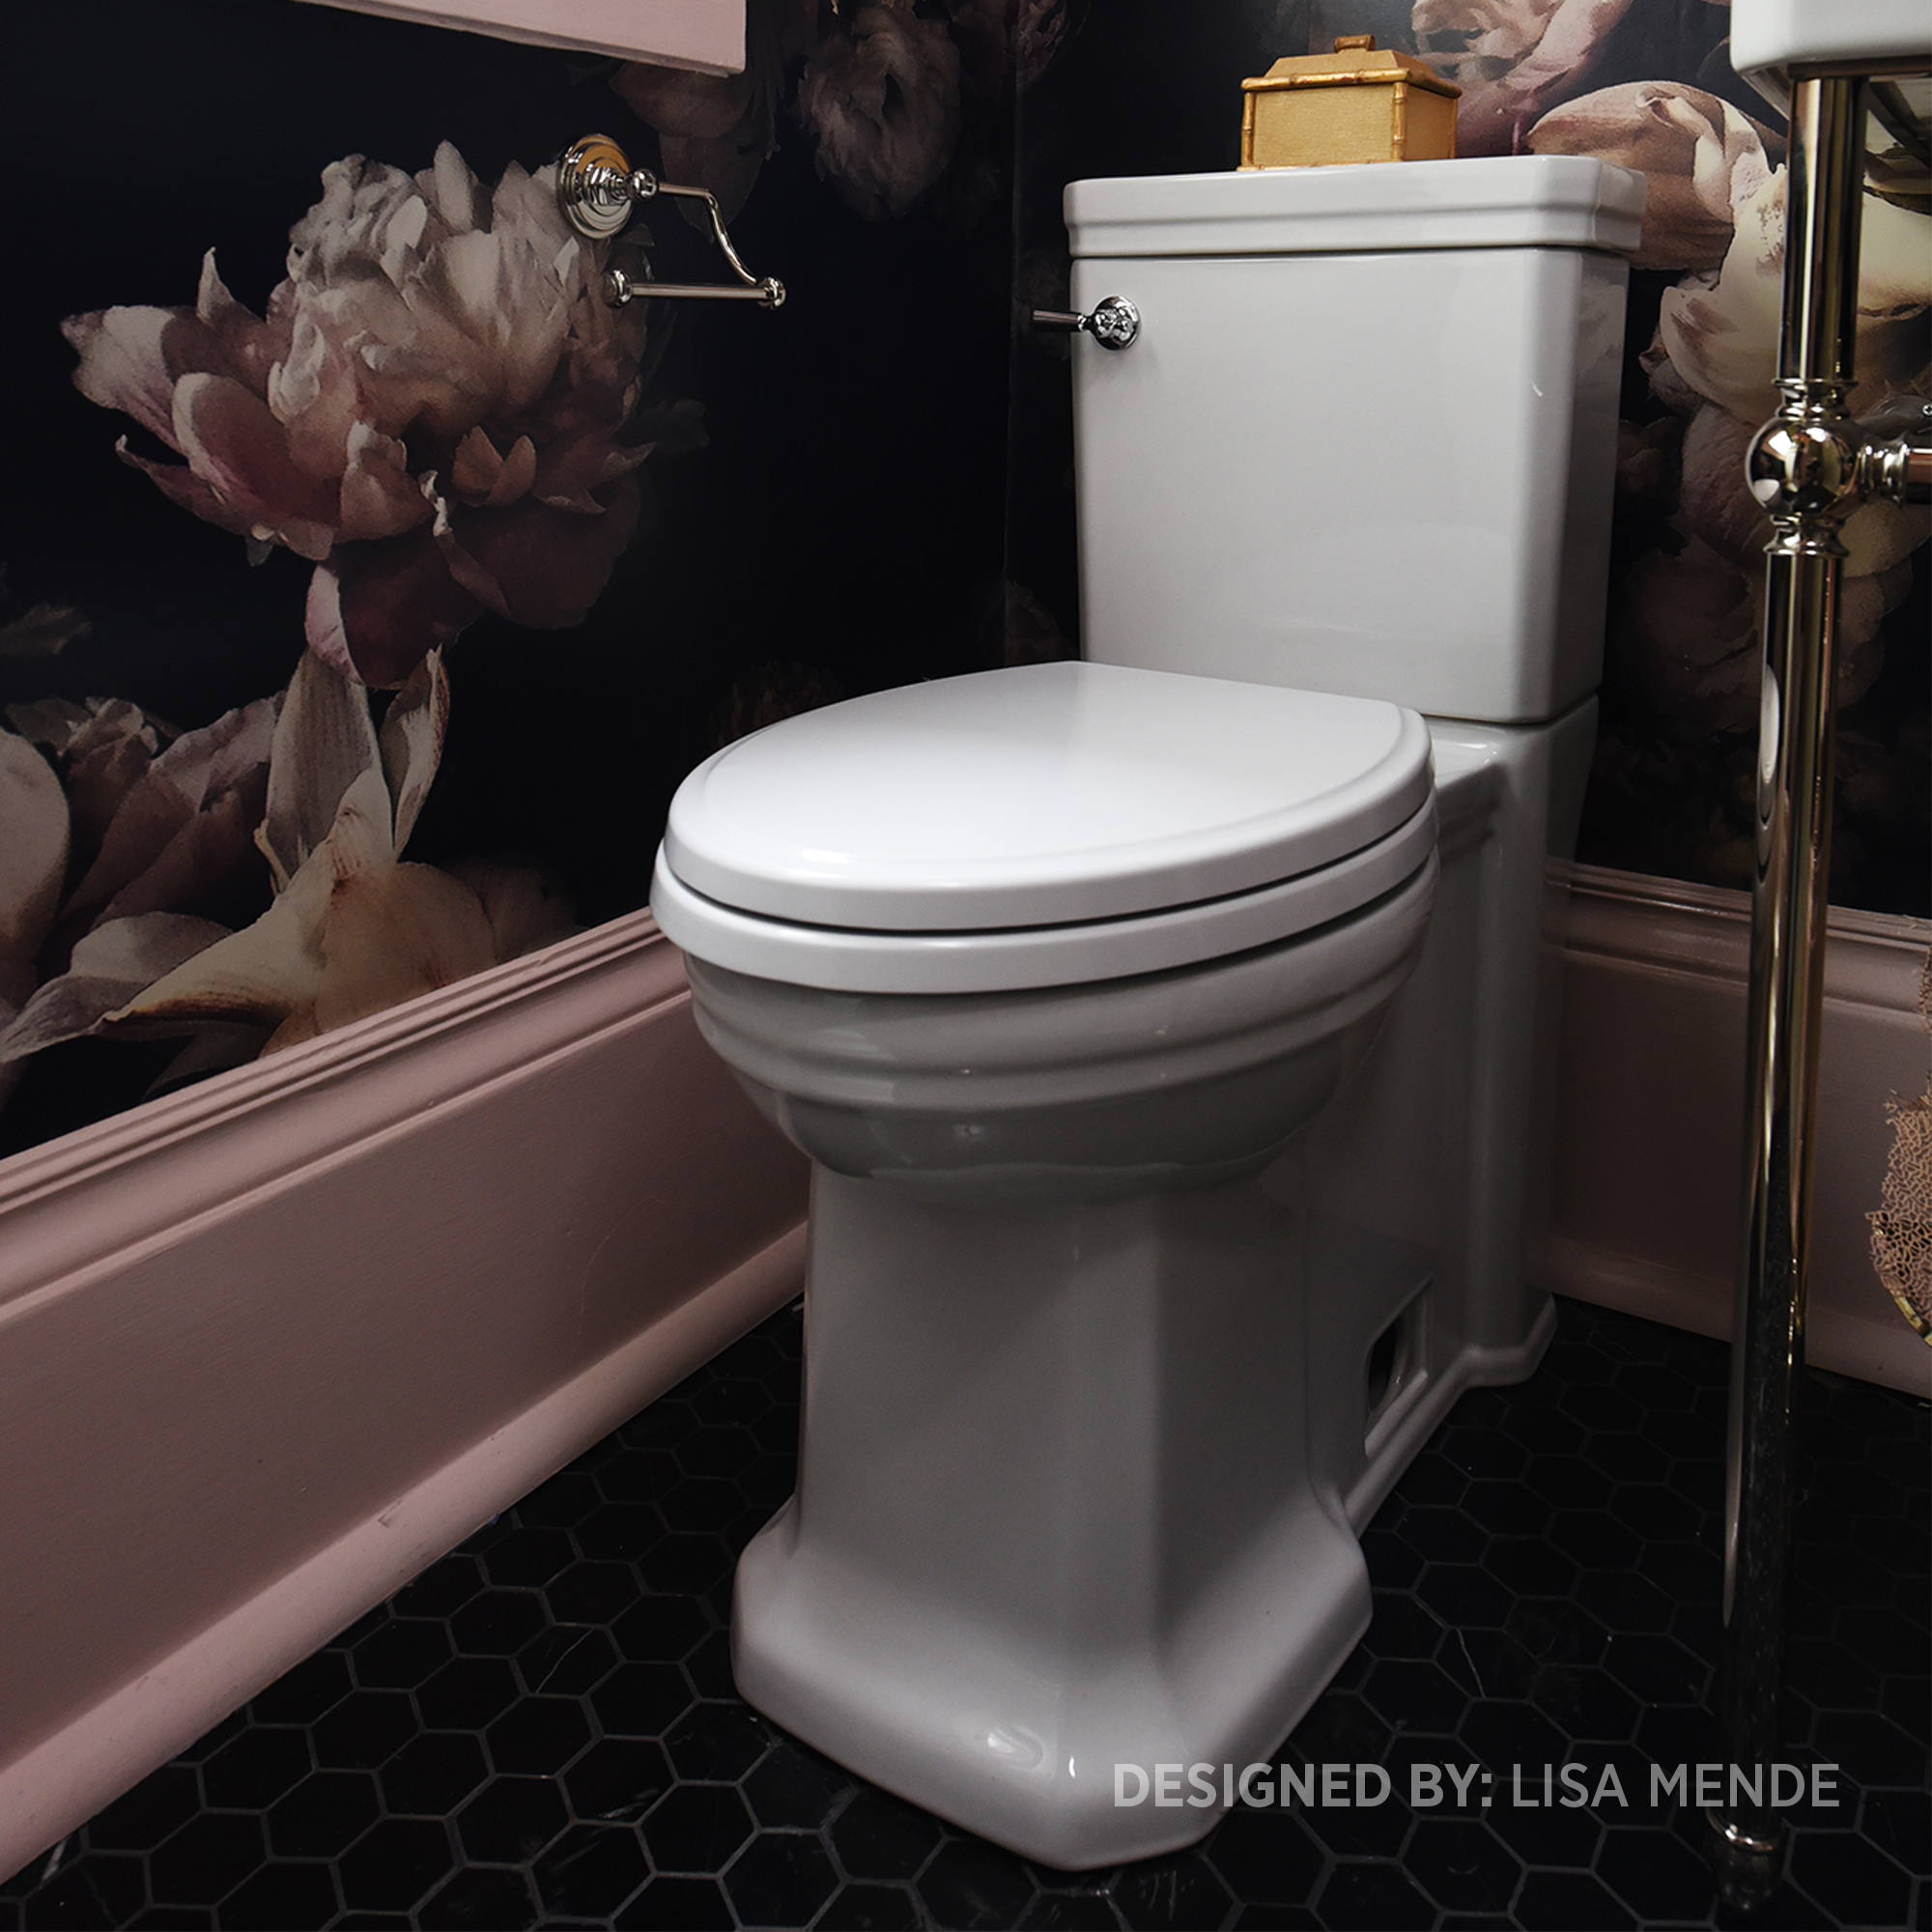 Fitzgerald Two-Piece Chair Height Elongated Toilet with Seat